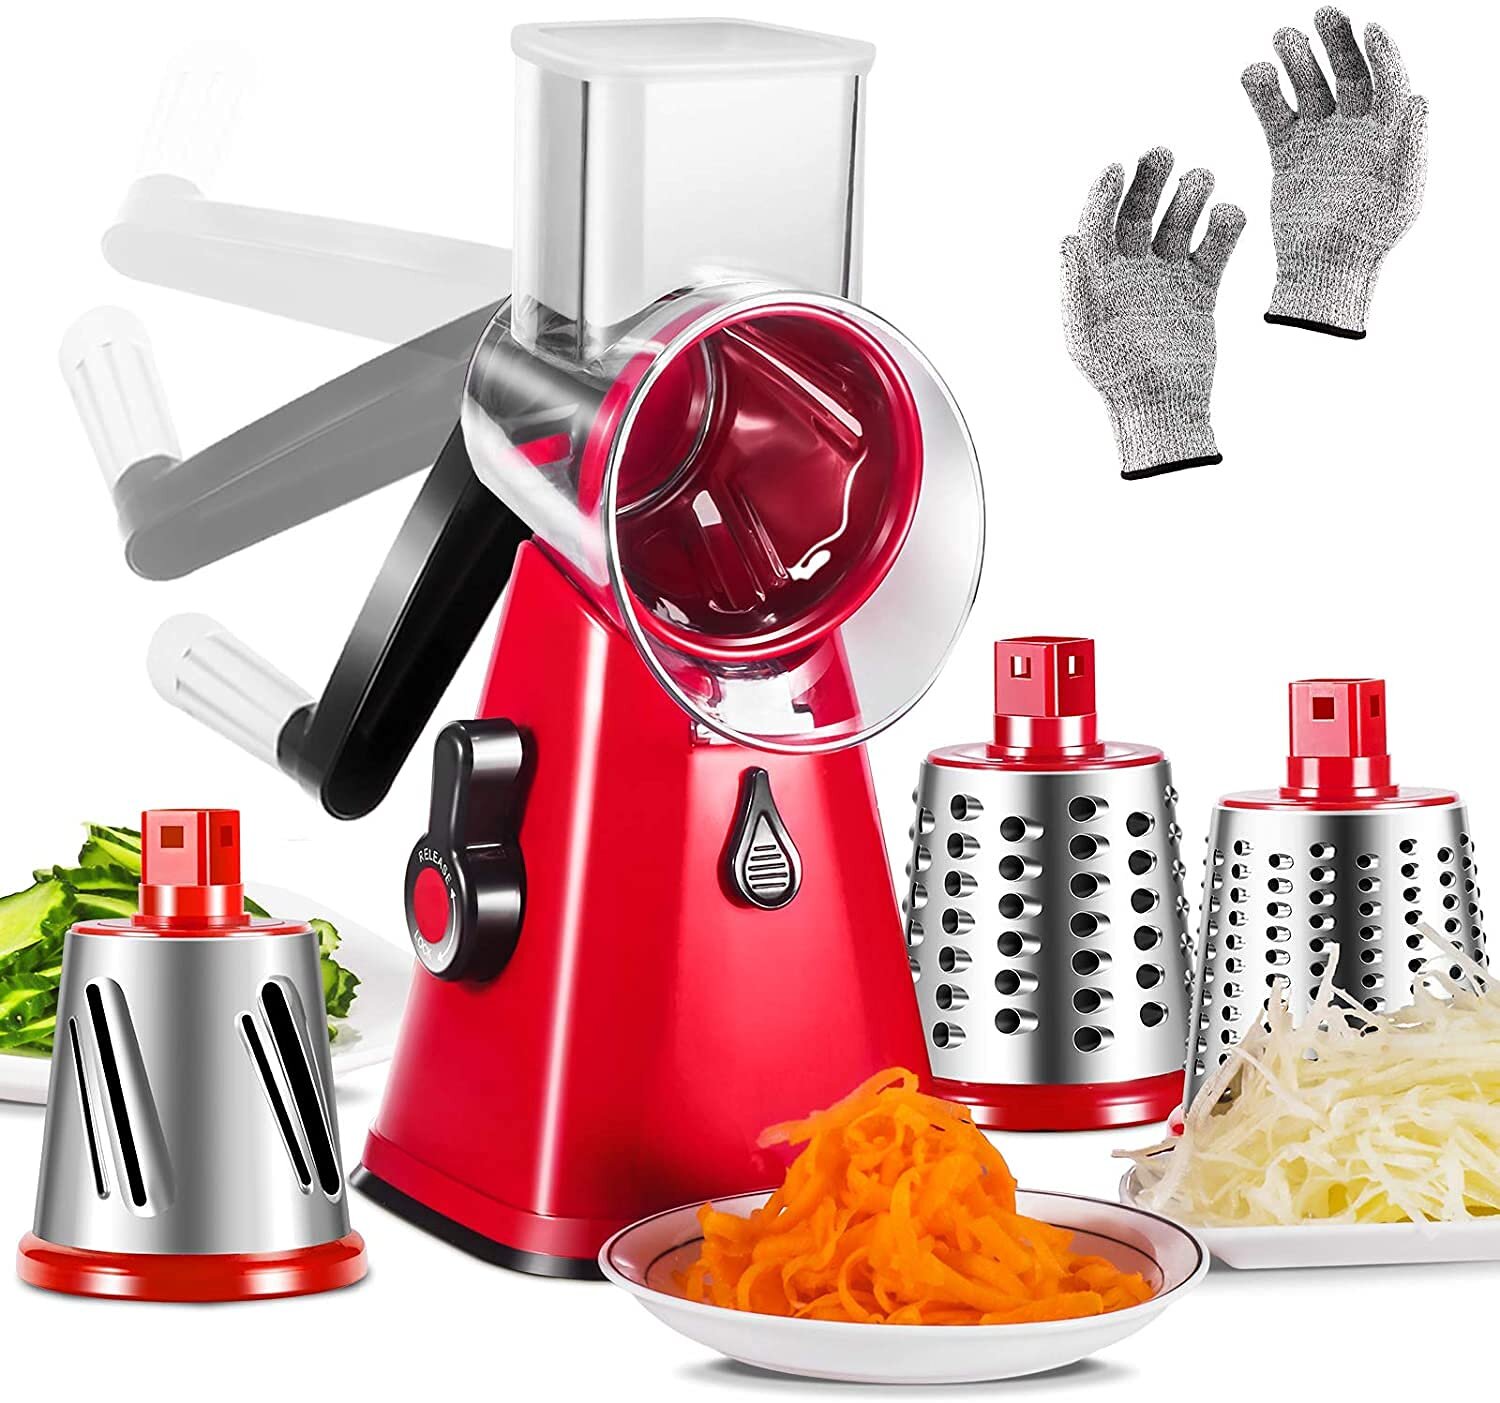 instant mist Sluiting slai Manual Rotary Cheese Grater, 3-In-1 Round Mandoline Slicer With  Interchangeable Stainless Steel Drum Blades Vegetable Slicer Nuts Grinder  Cheese Shredder With Suction Cup Base | Wayfair